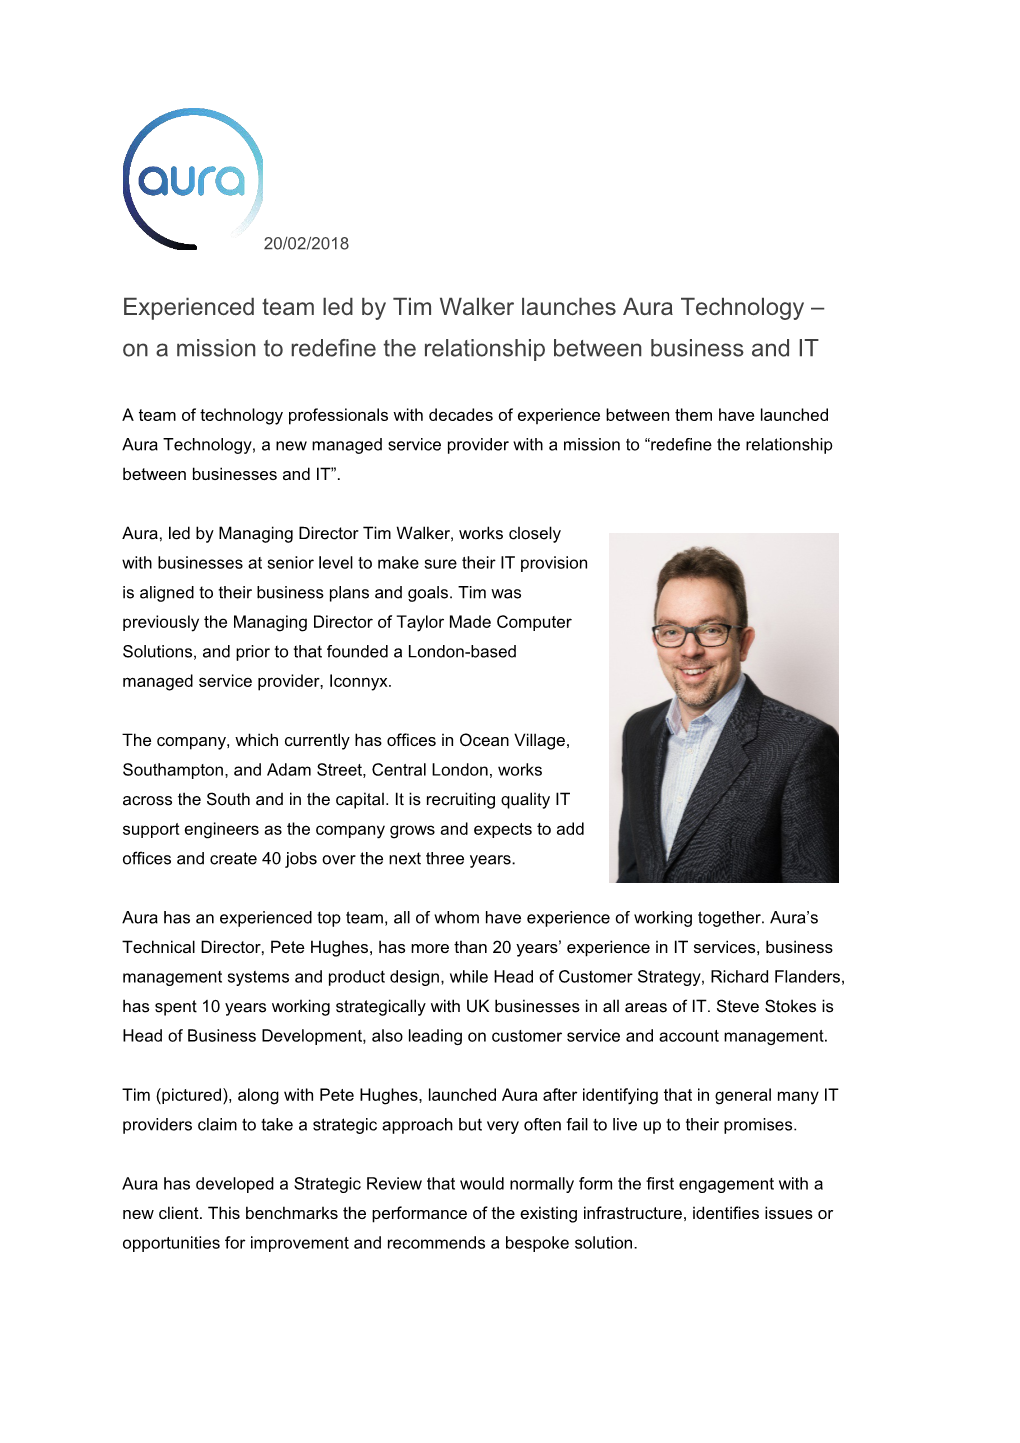 Experienced Team Led by Tim Walker Launches Aura Technology on a Mission to Redefine The